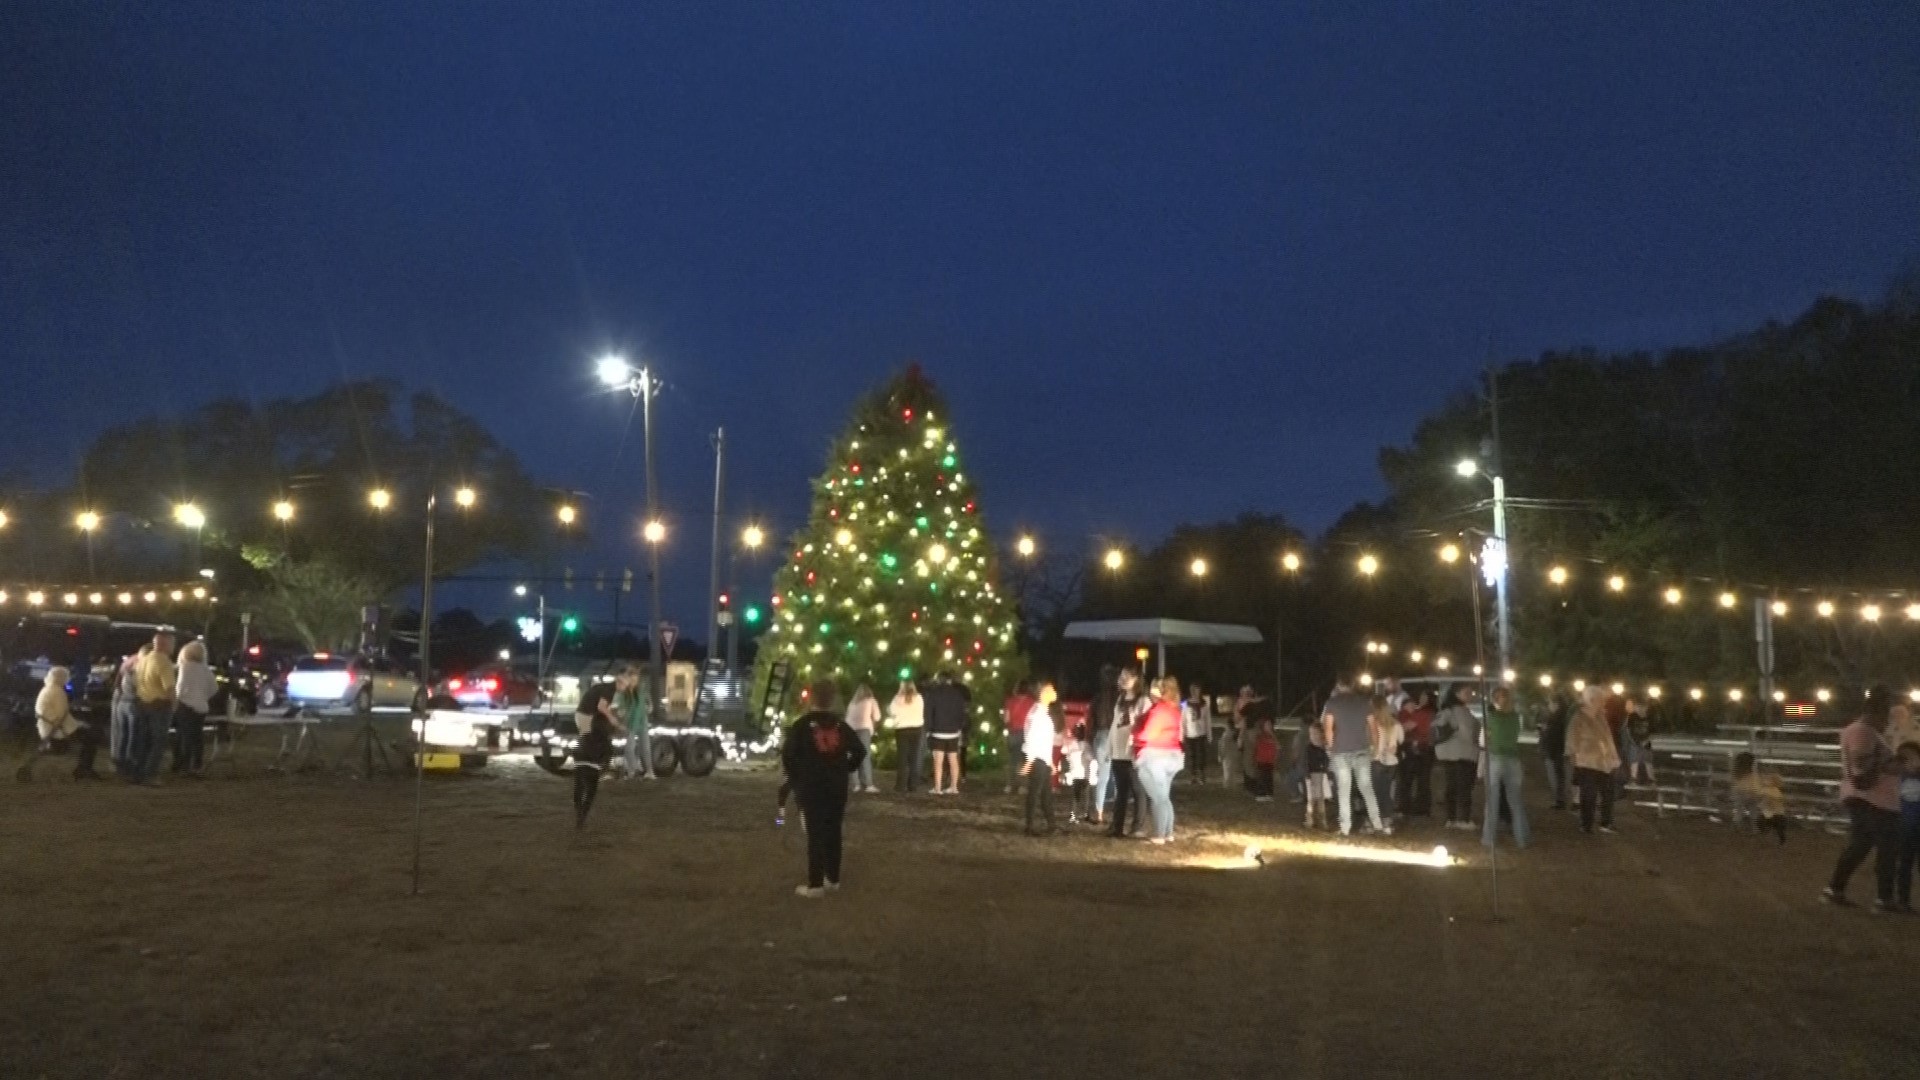 South Congaree, SC lights up the night with Christmas tree